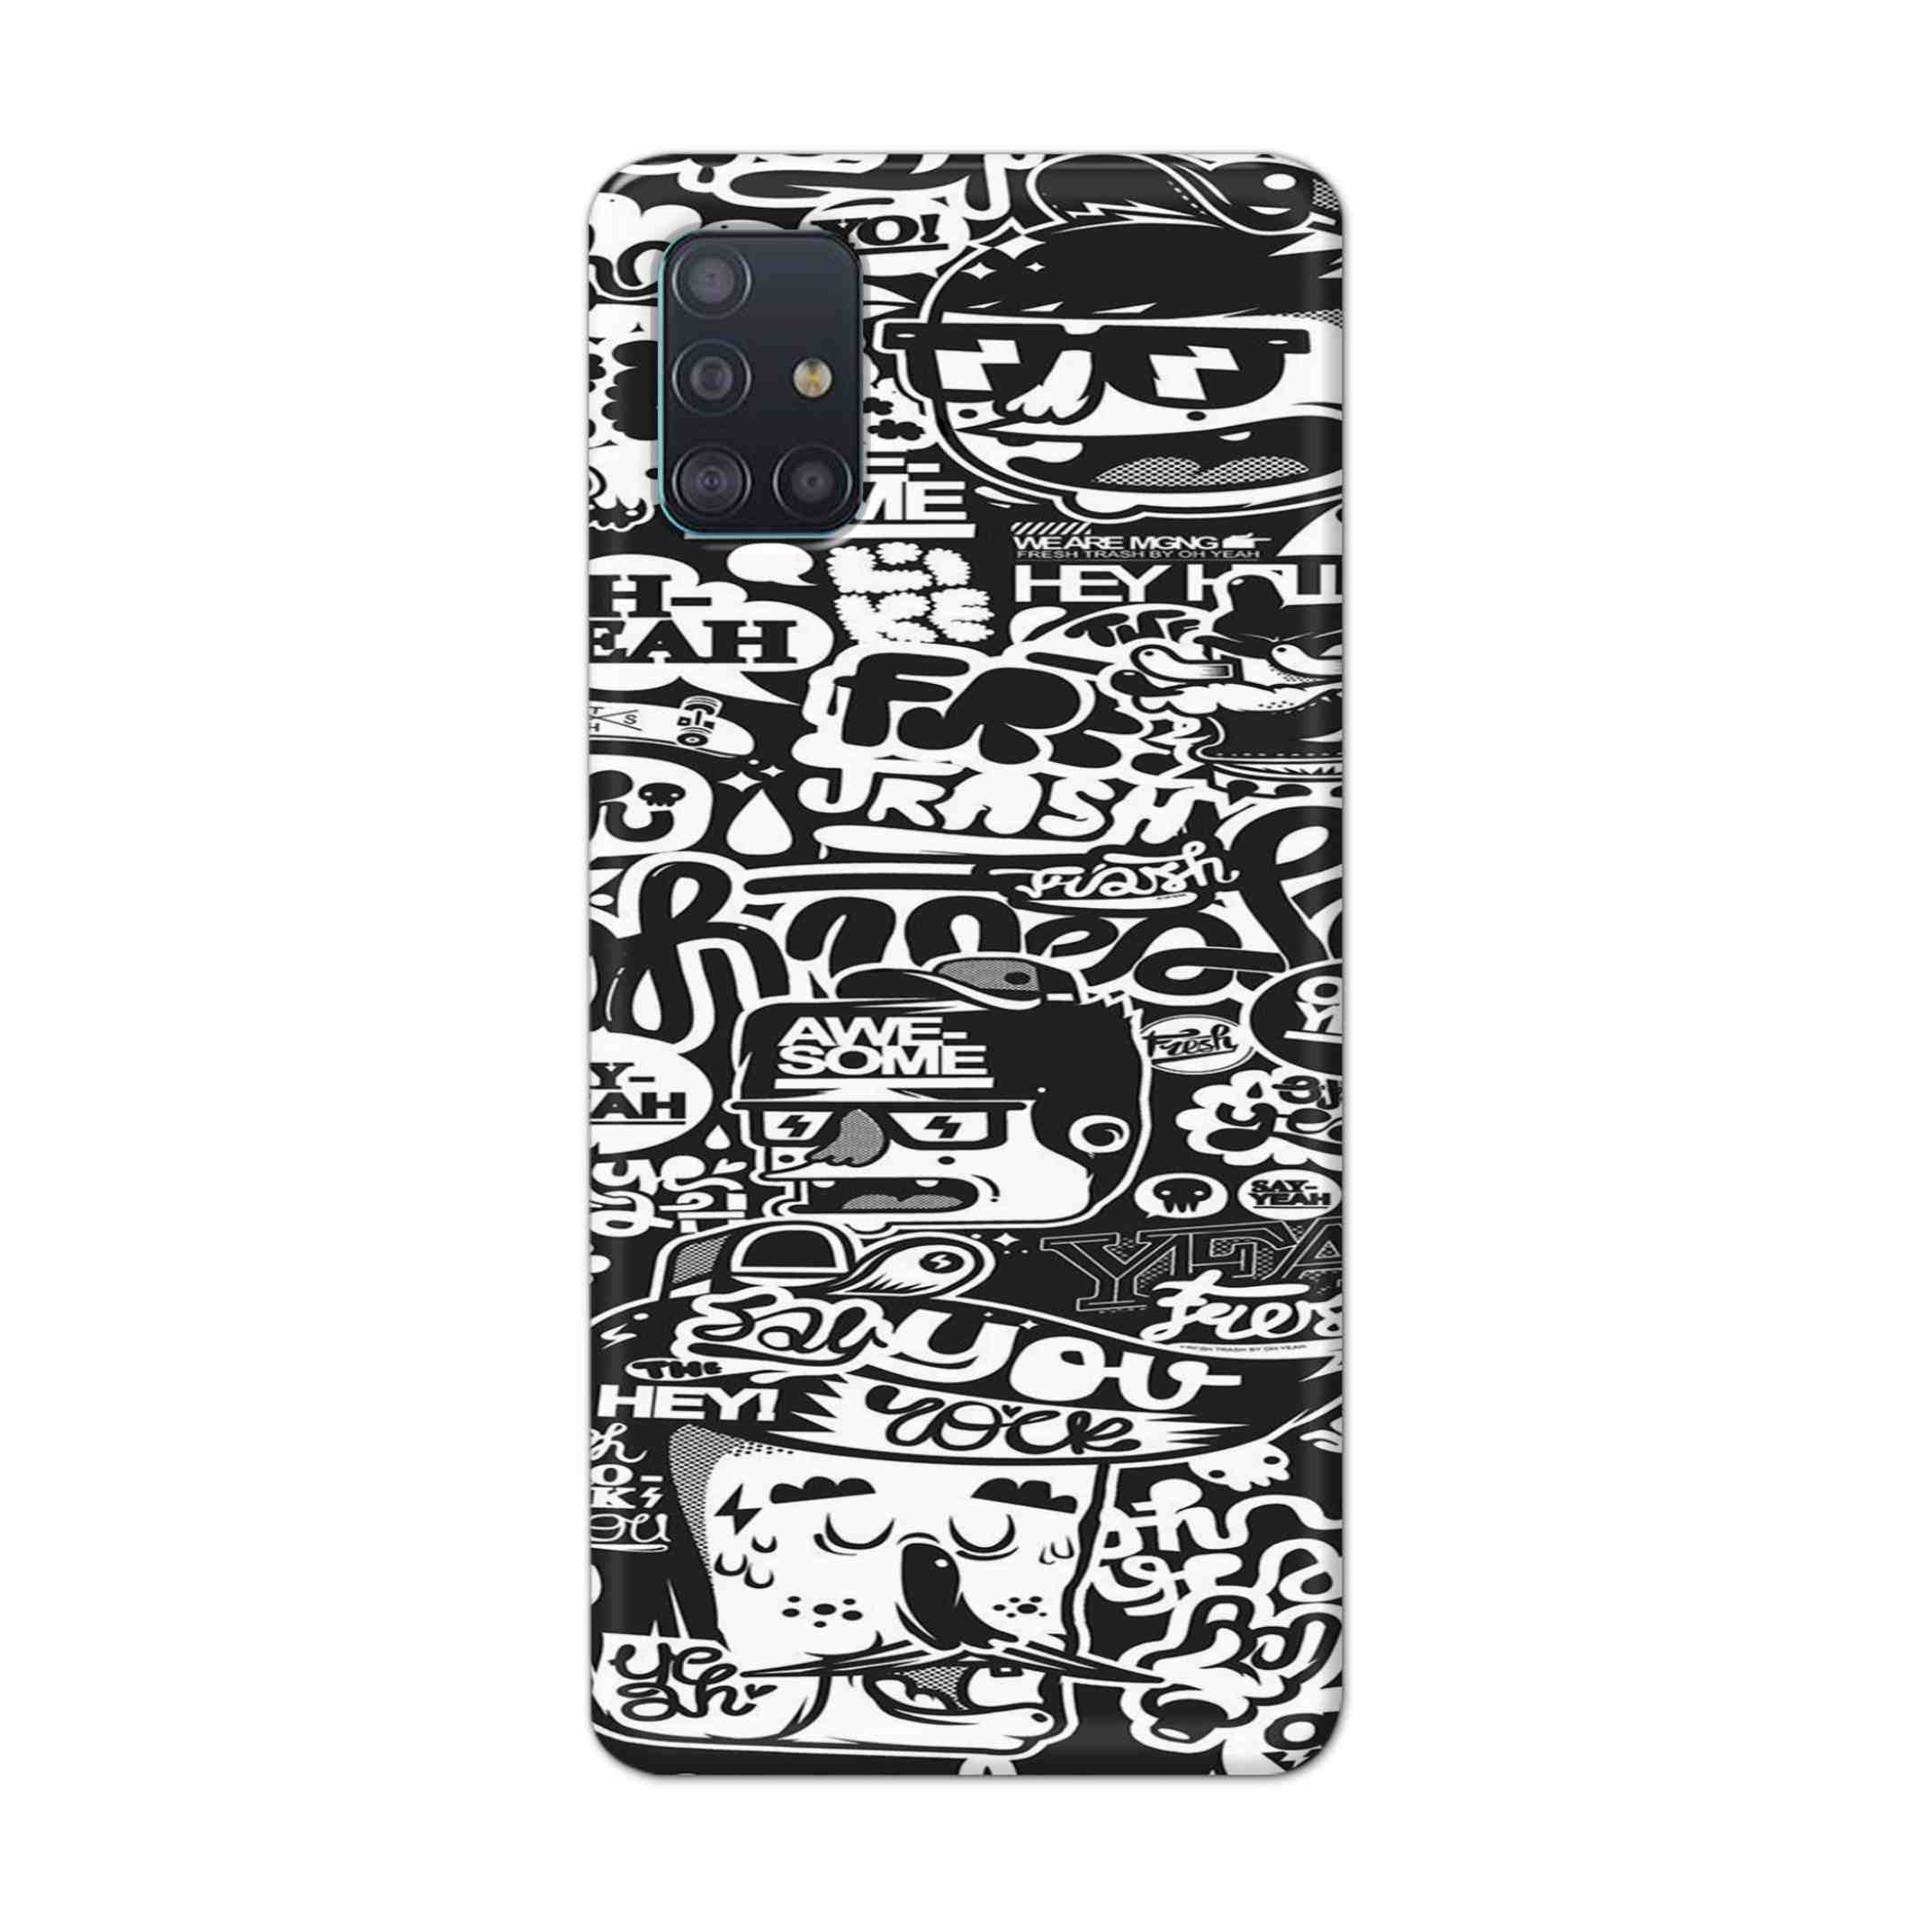 Buy Awesome Hard Back Mobile Phone Case Cover For Samsung Galaxy A71 Online